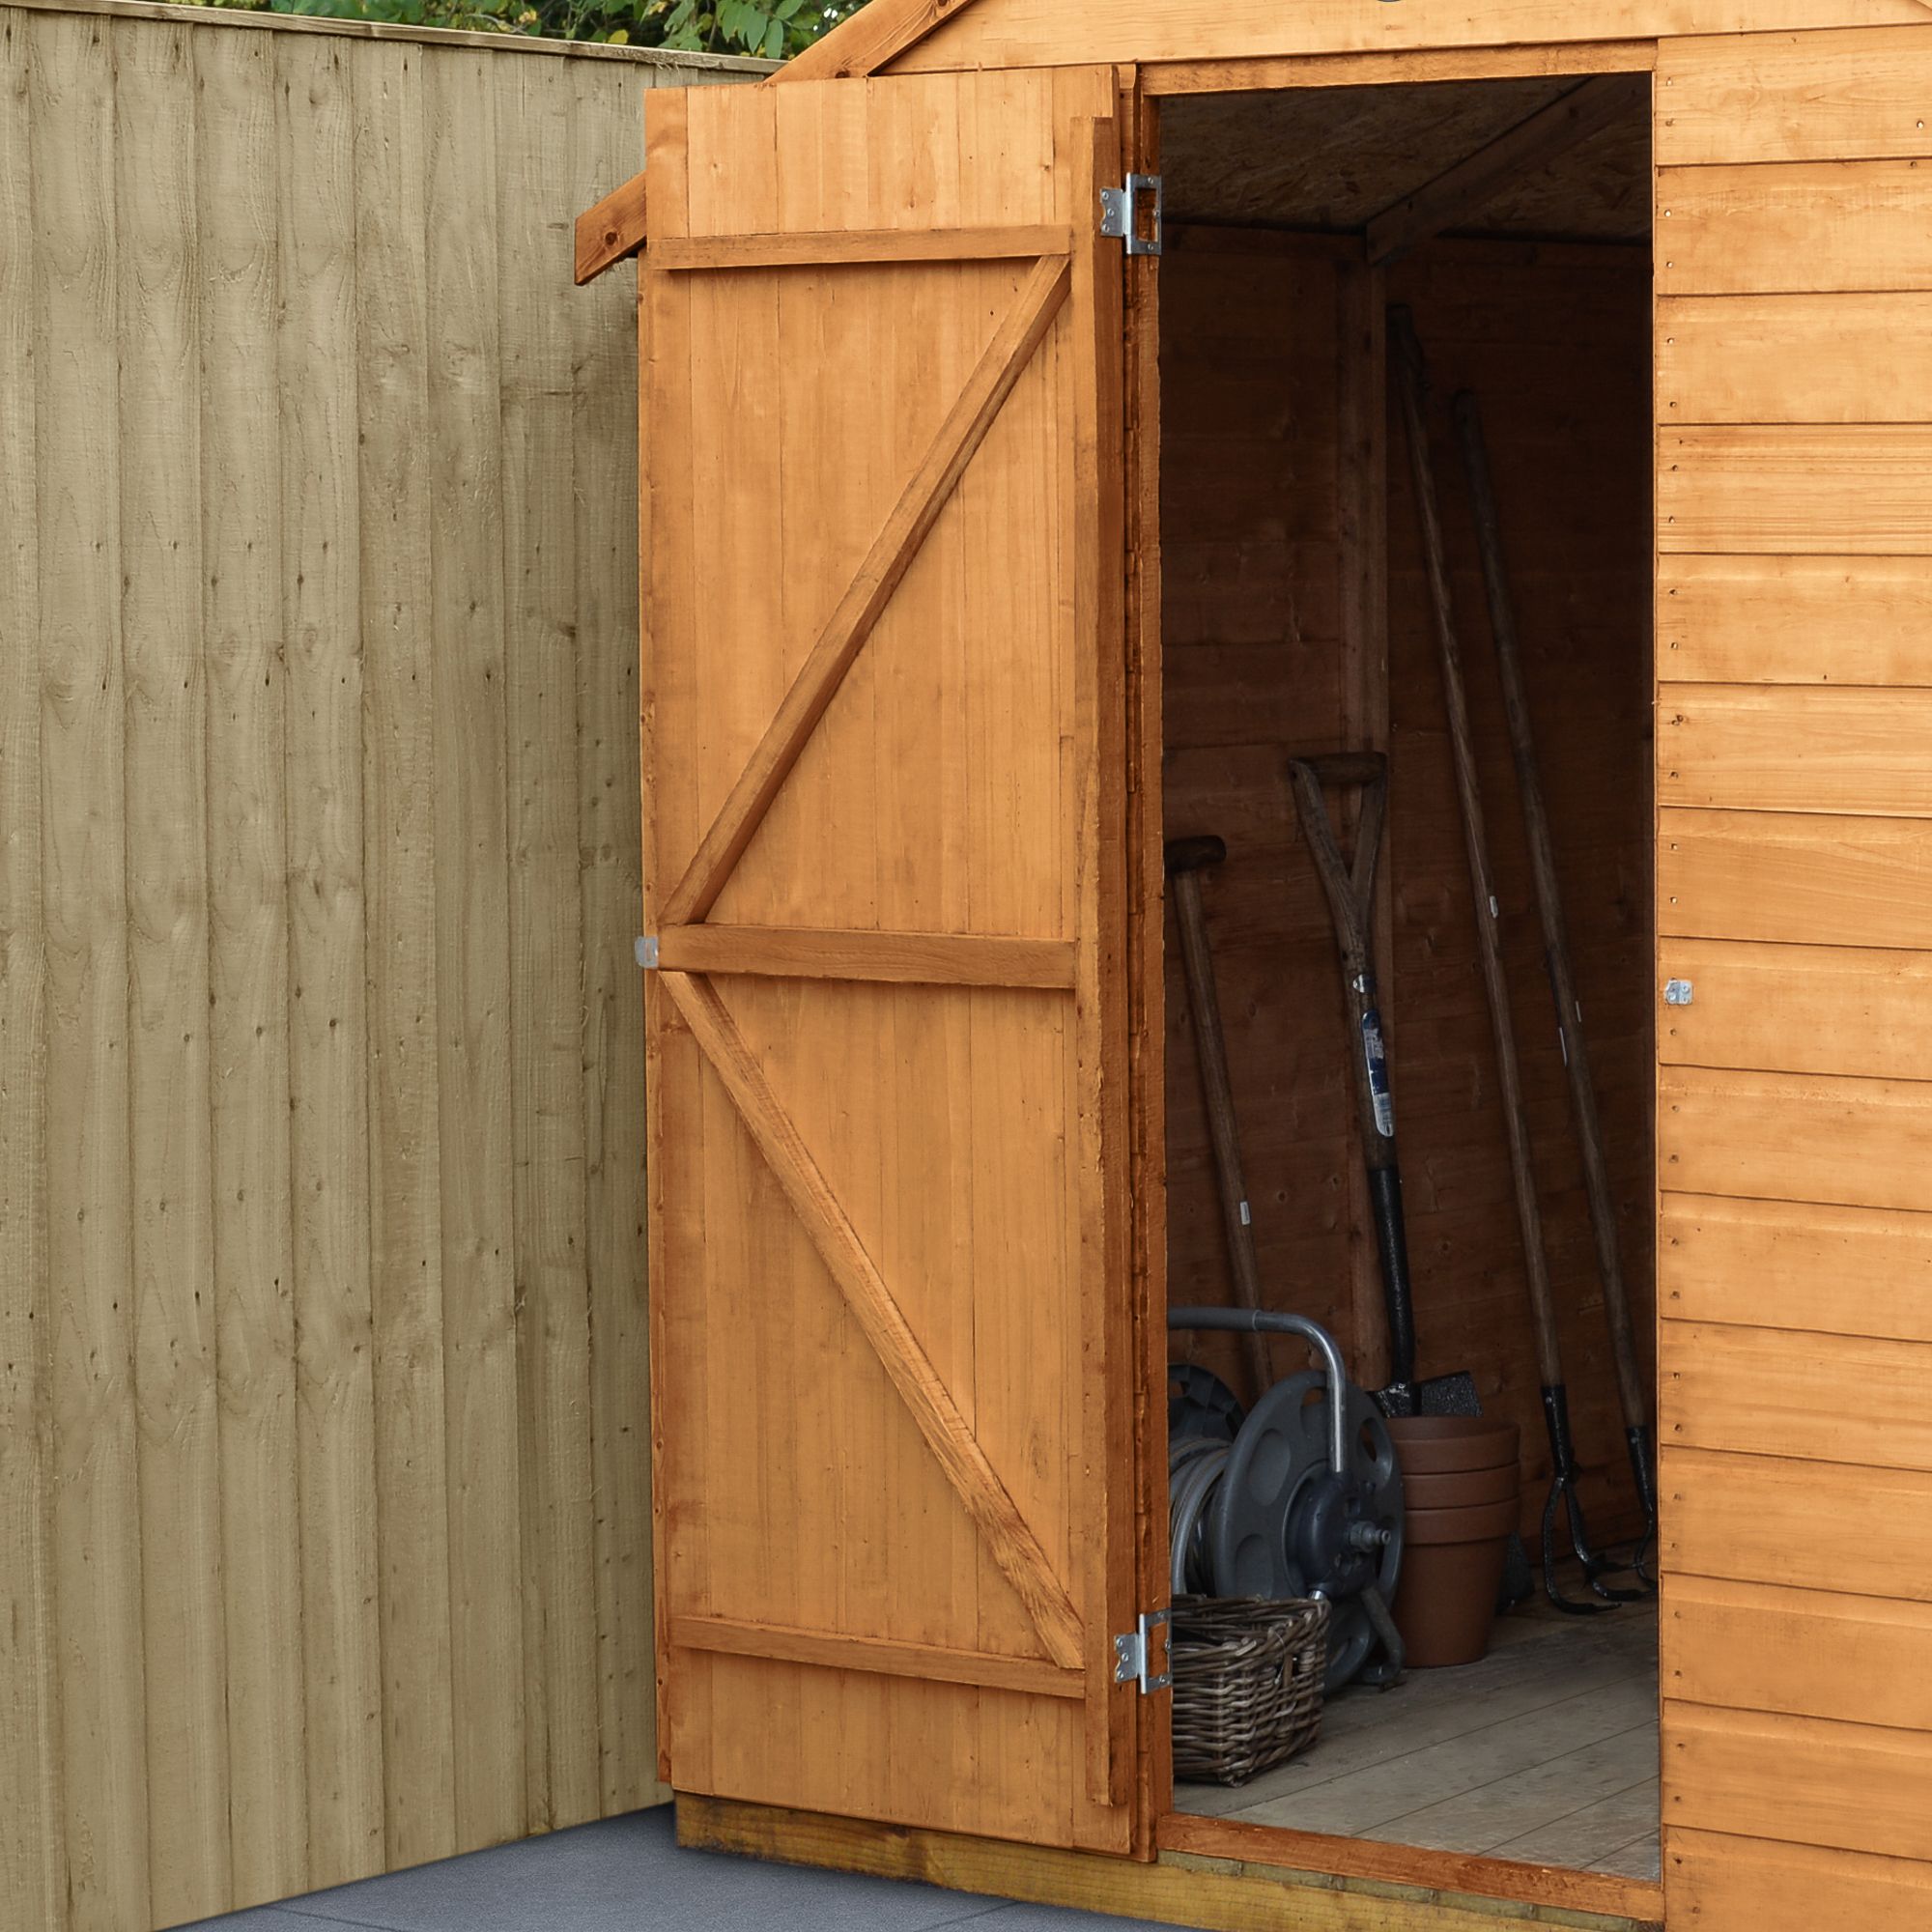 Forest Garden Shiplap 6x4 ft Reverse apex Wooden Shed with floor